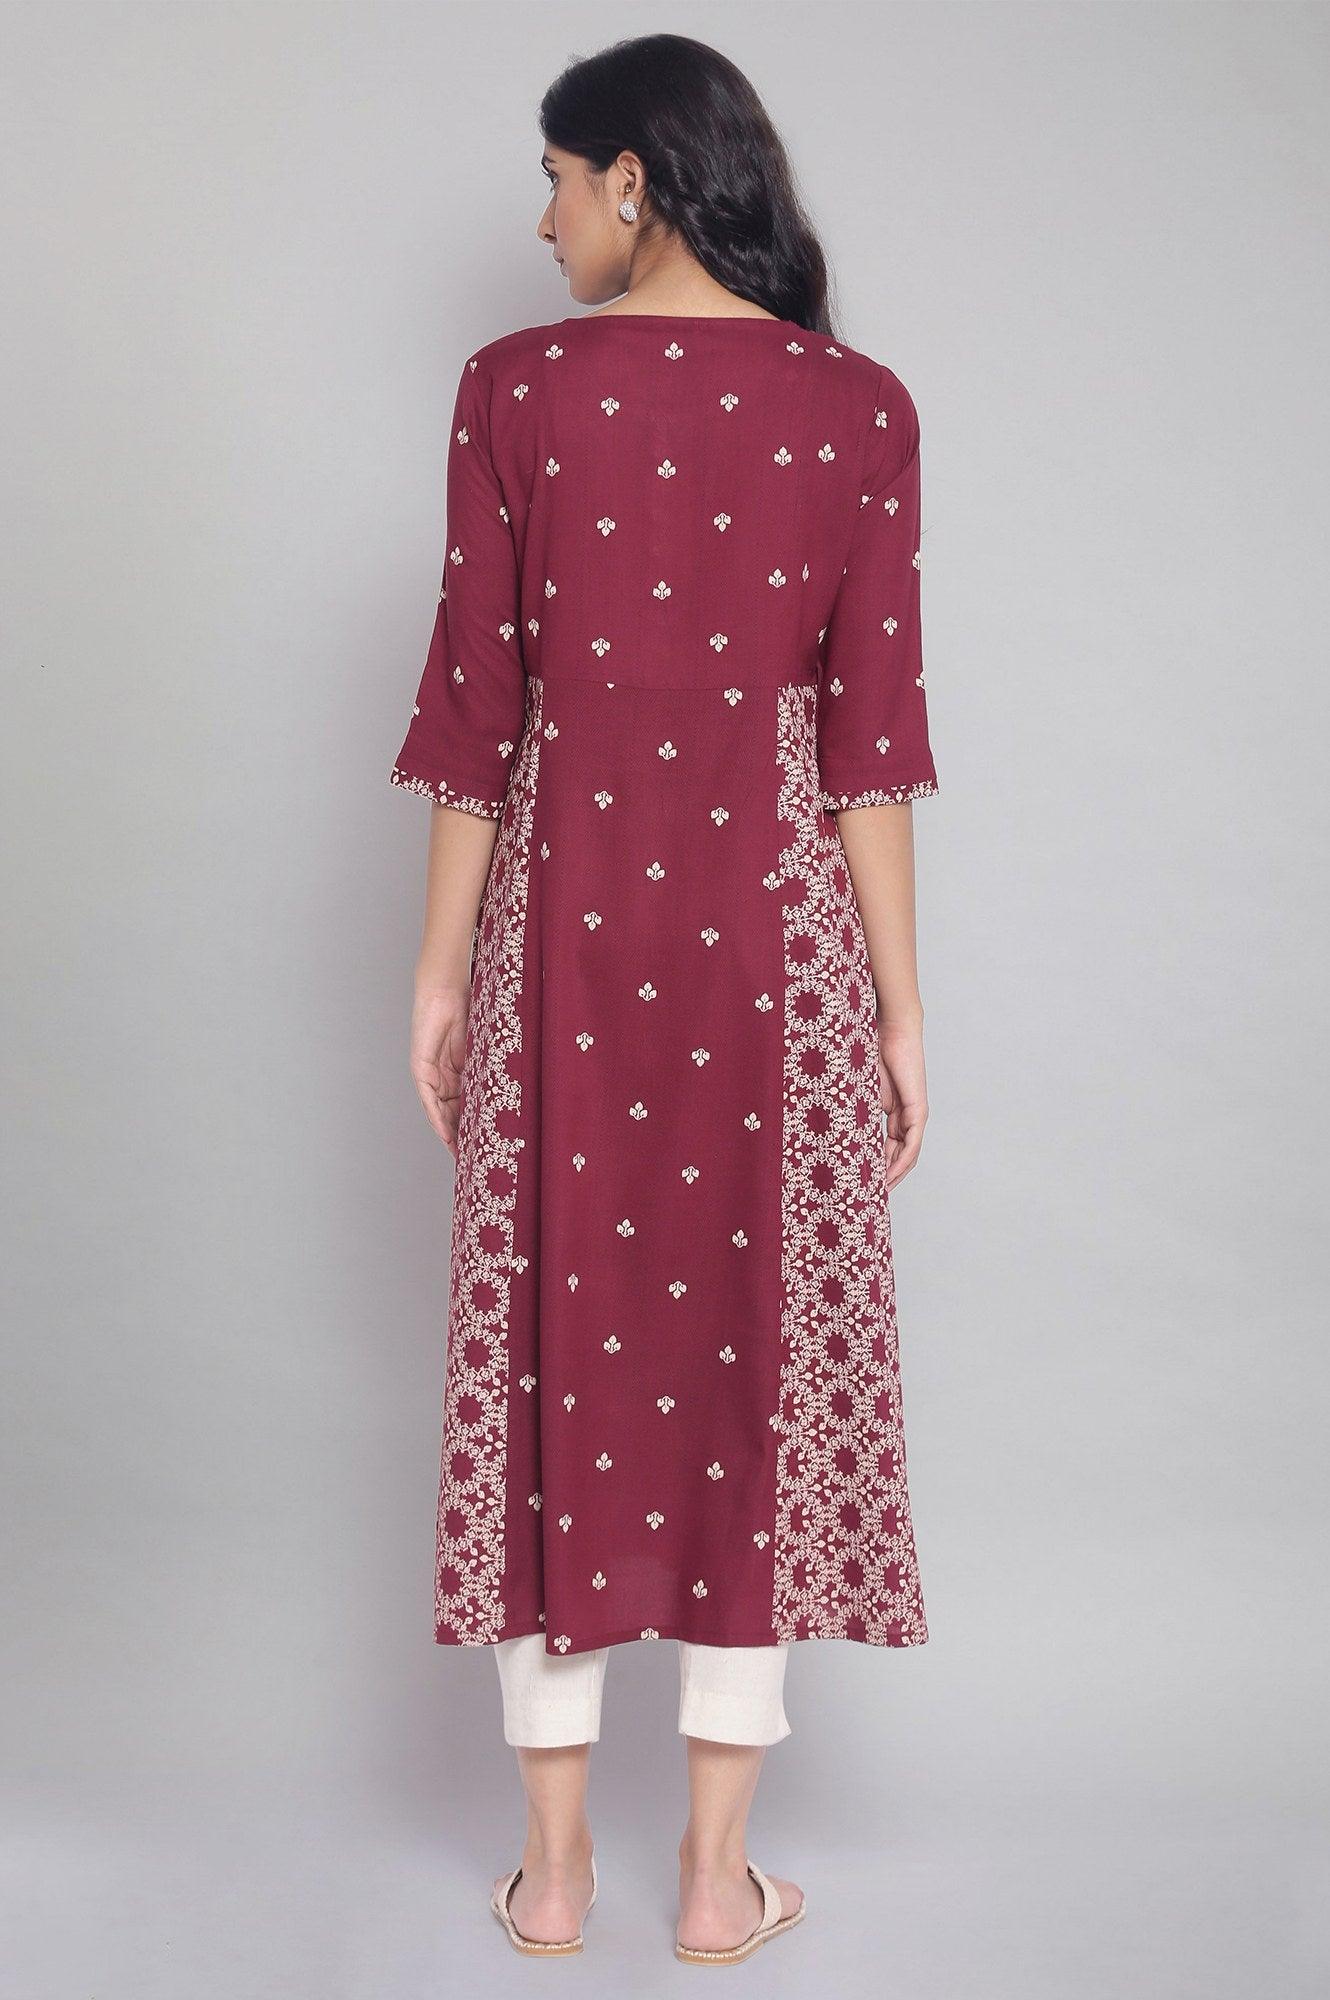 Maroon Flared Gathered Dress with Embroidery - wforwoman